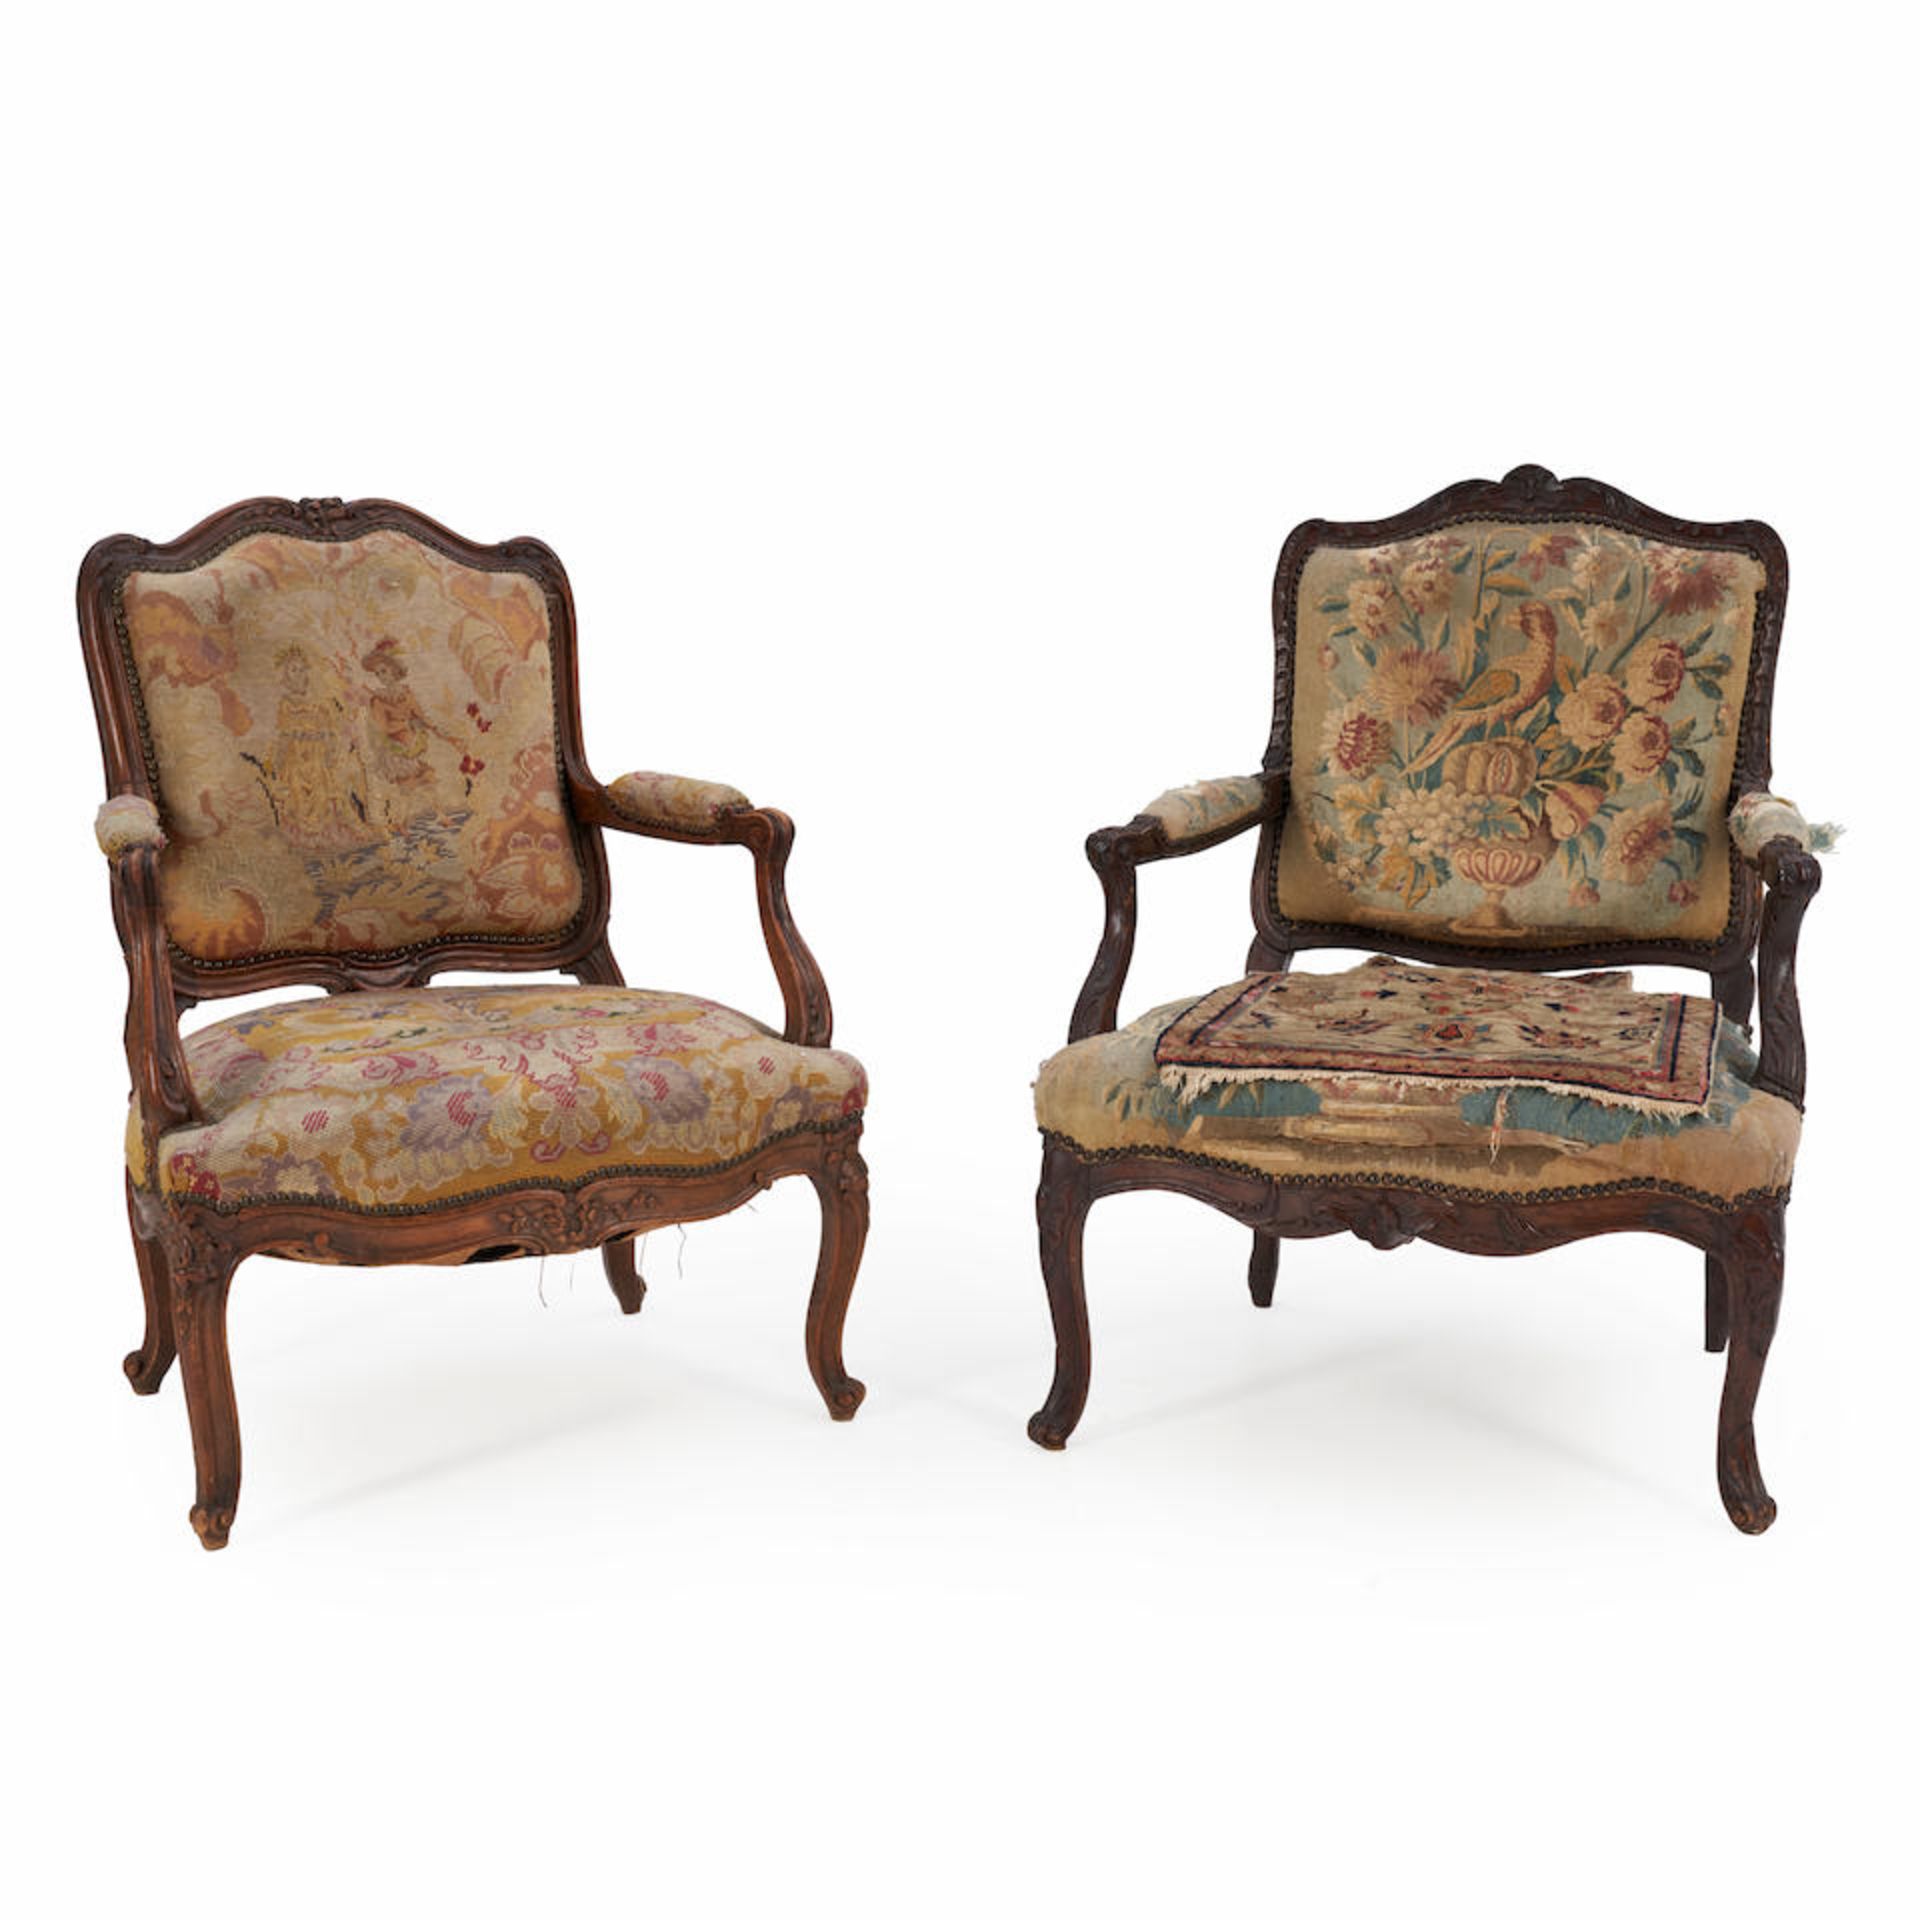 TWO LOUIX XV-STYLE FAUTEUIL - Image 2 of 2